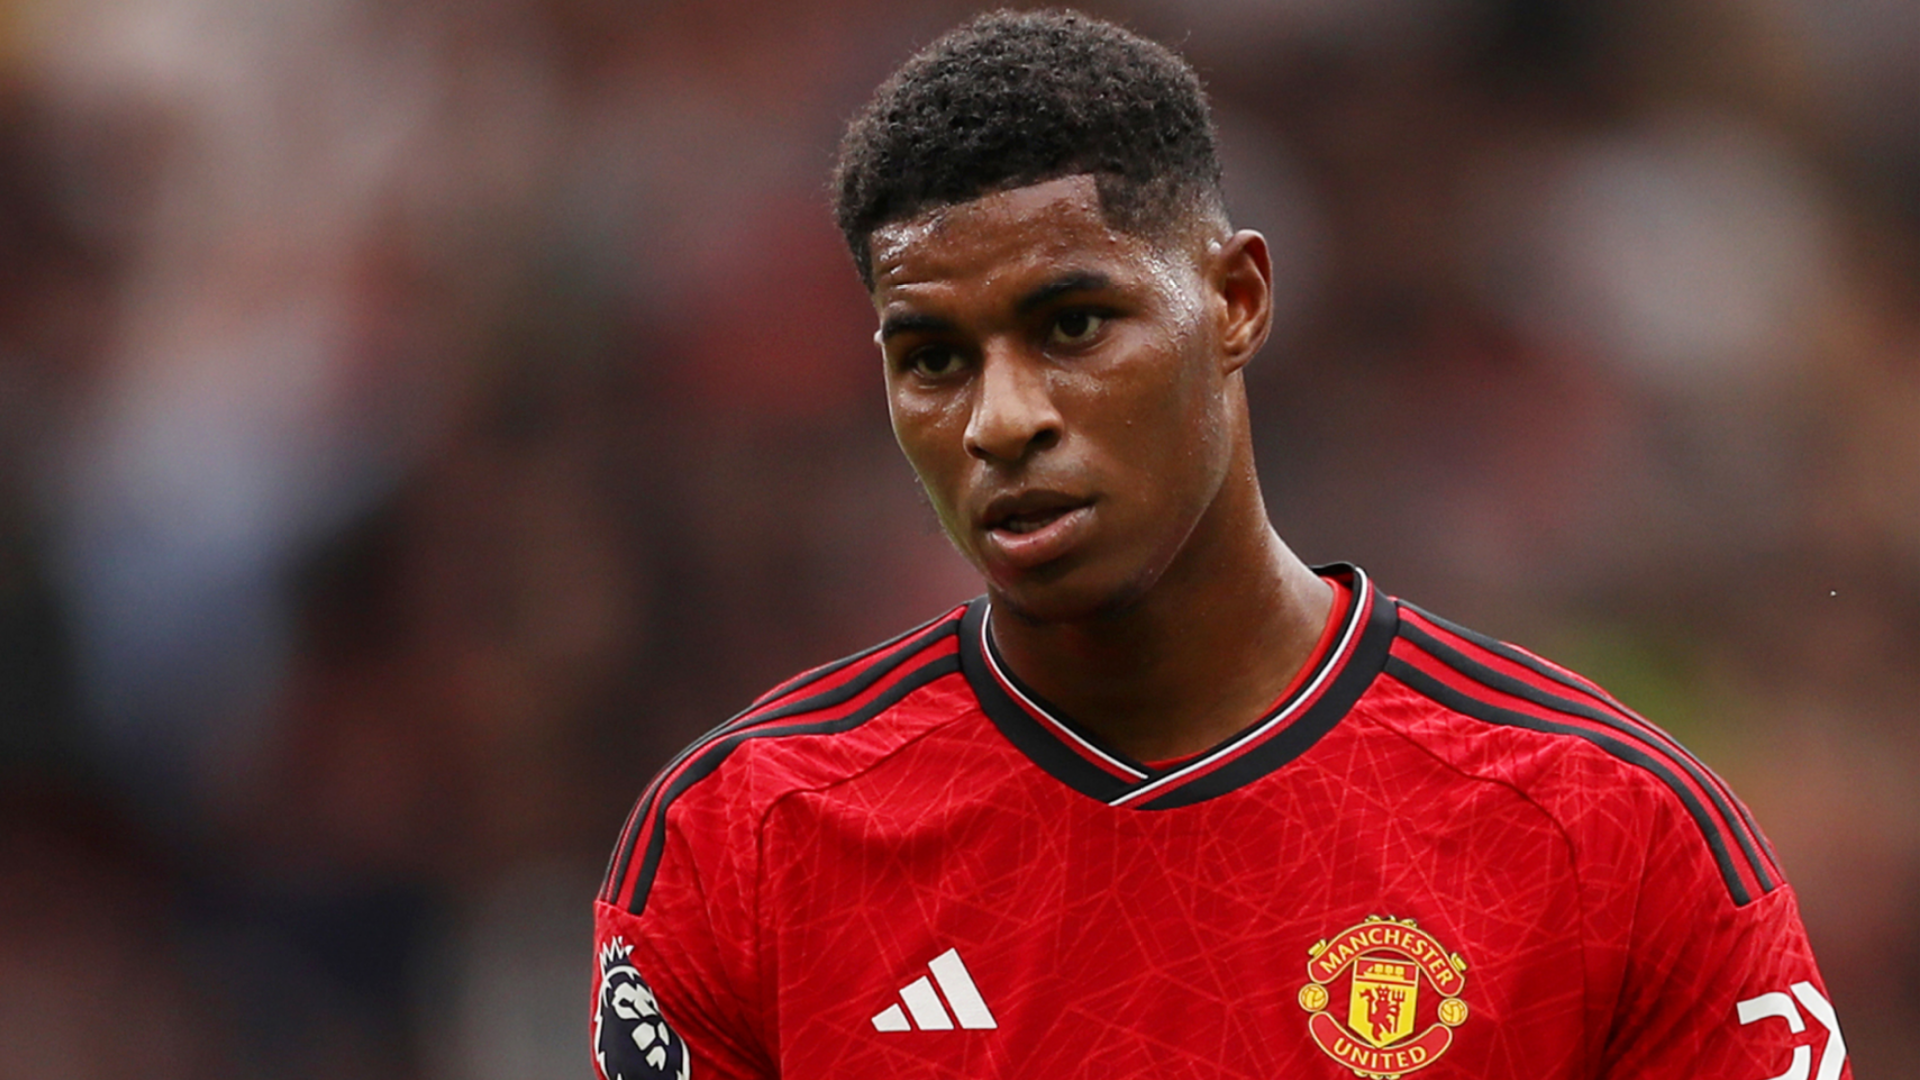 Stop spreading malicious rumours' - Marcus Rashford hits out at Man Utd  transfer speculation after Red Devils' dismal start to season